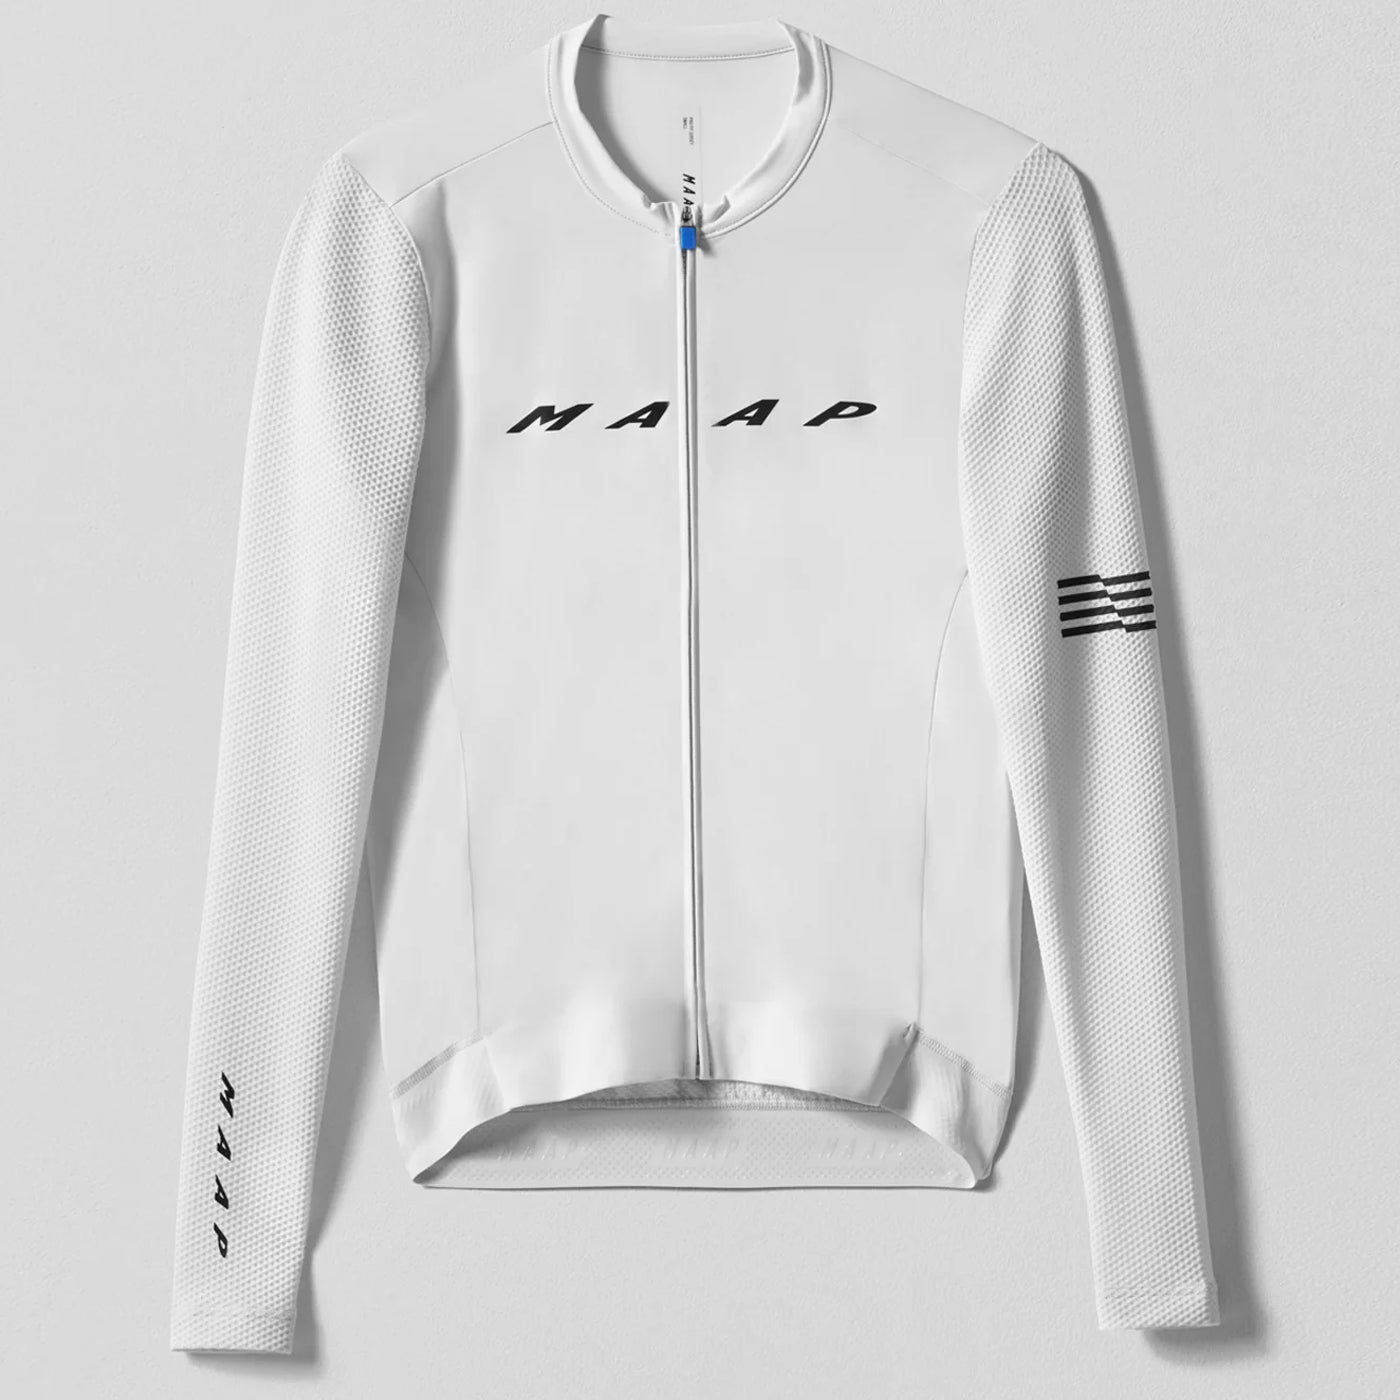 Maap Evade Pro Base 2.0 long sleeve jersey - White | All4cycling